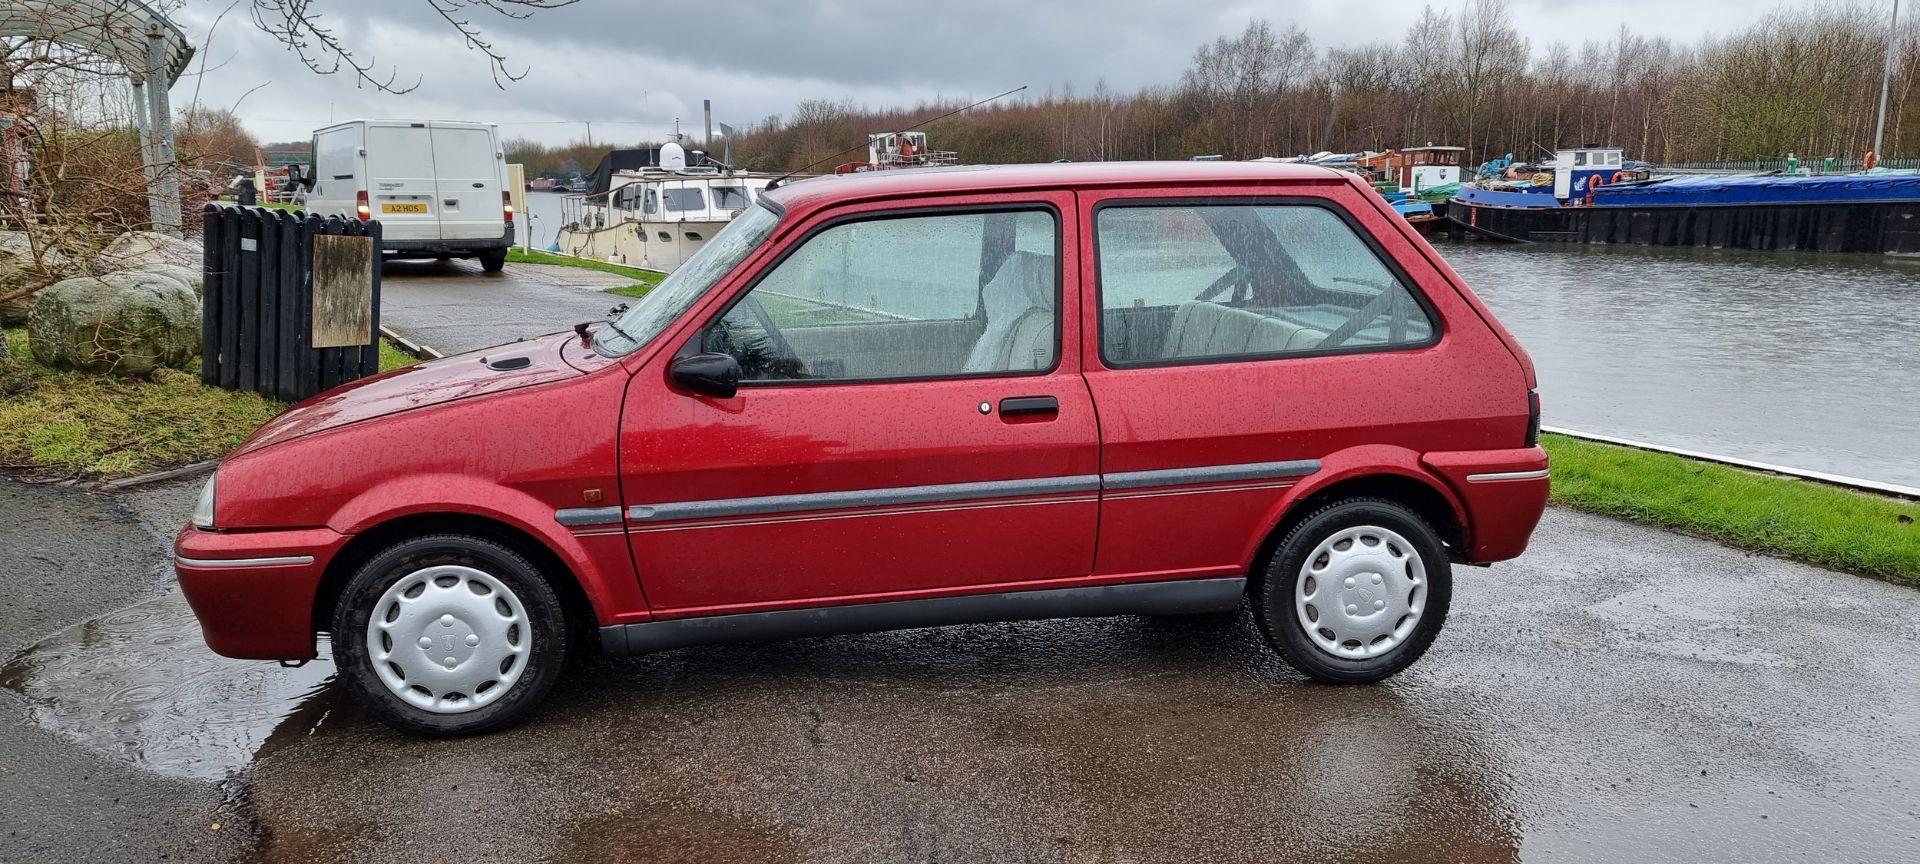 1998 Rover Metro 100 Ascot SE diesel, 1,527cc. Registration number R759 SVN. Chassis number - Image 8 of 13